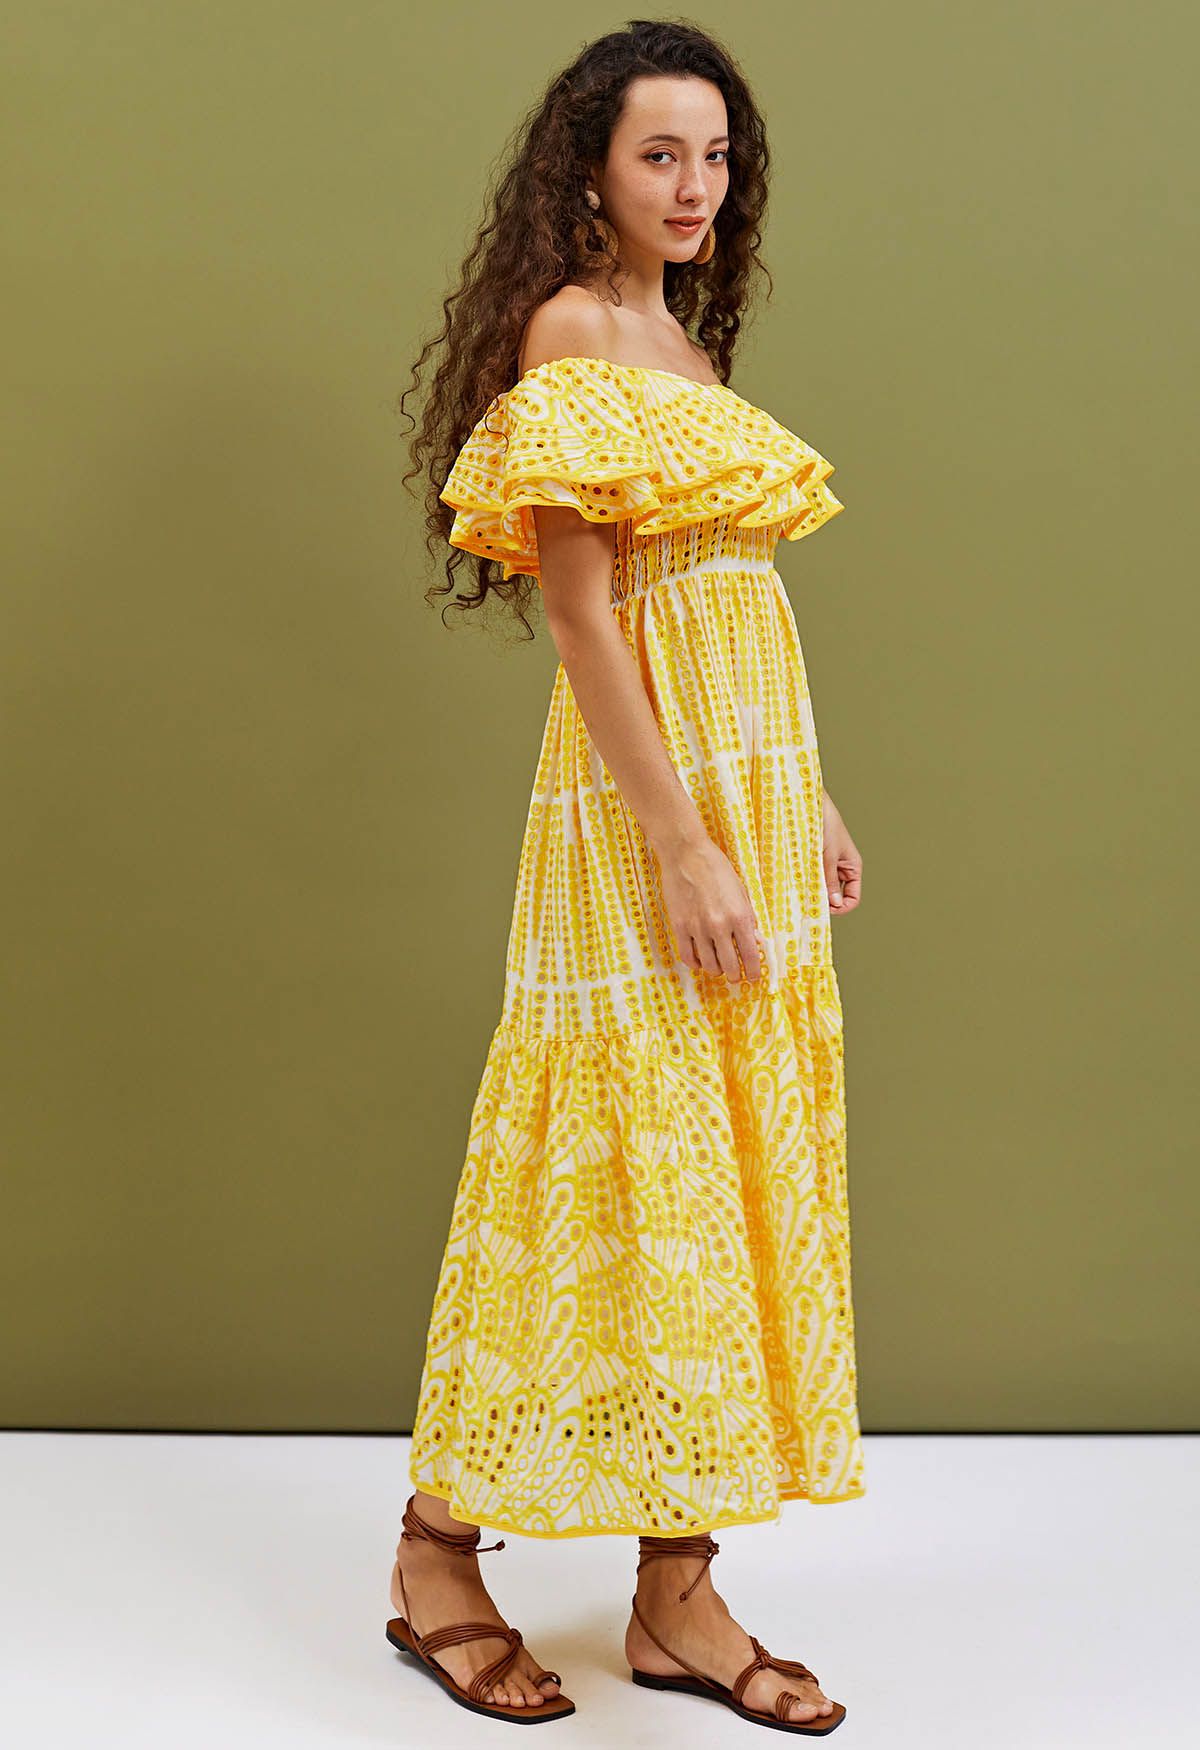 Off-Shoulder Tiered Ruffle Embroidered Eyelet Dress